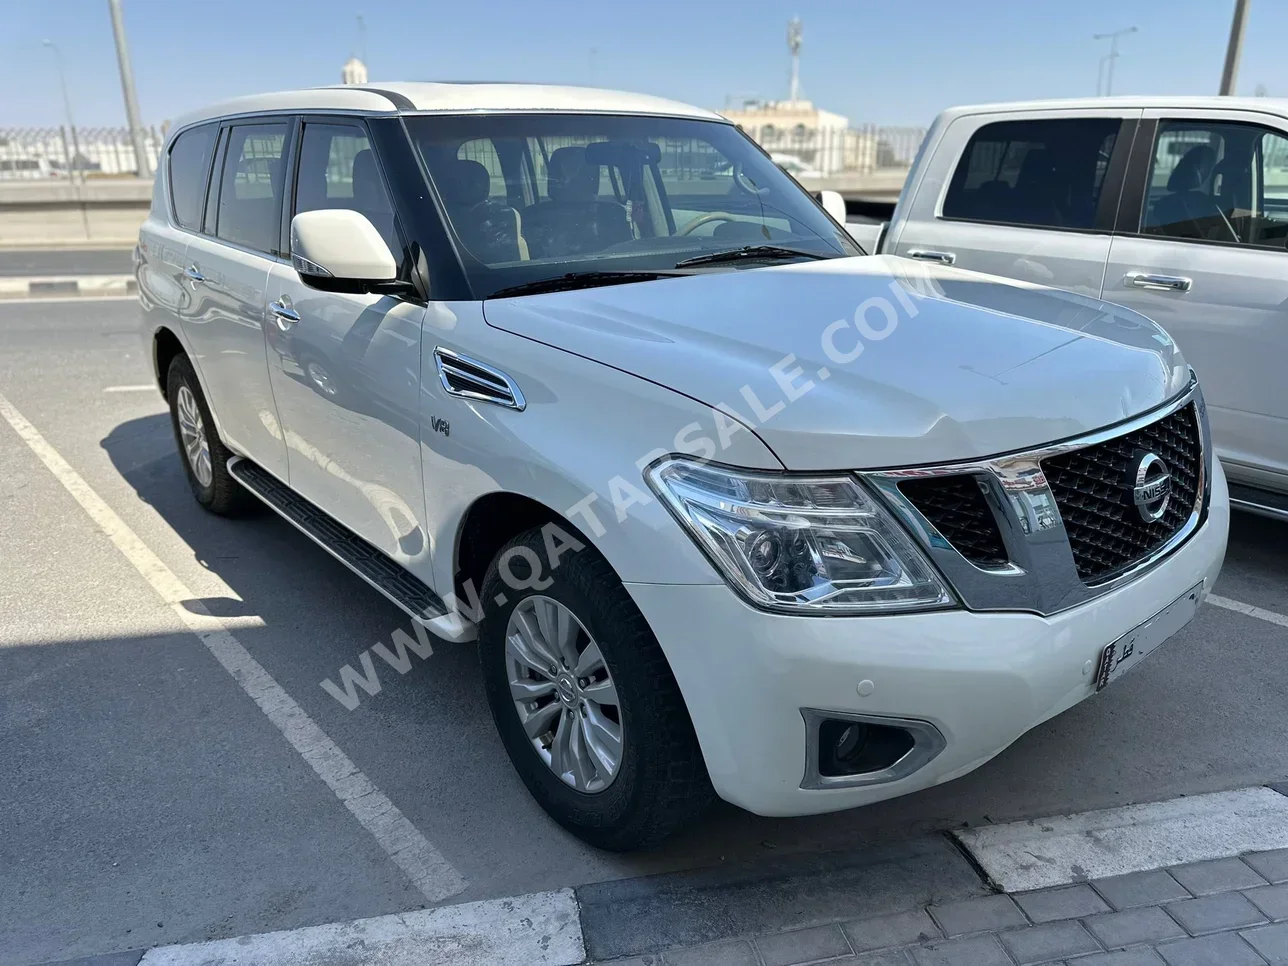  Nissan  Patrol  SE  2016  Automatic  293,000 Km  8 Cylinder  Four Wheel Drive (4WD)  SUV  Pearl  With Warranty